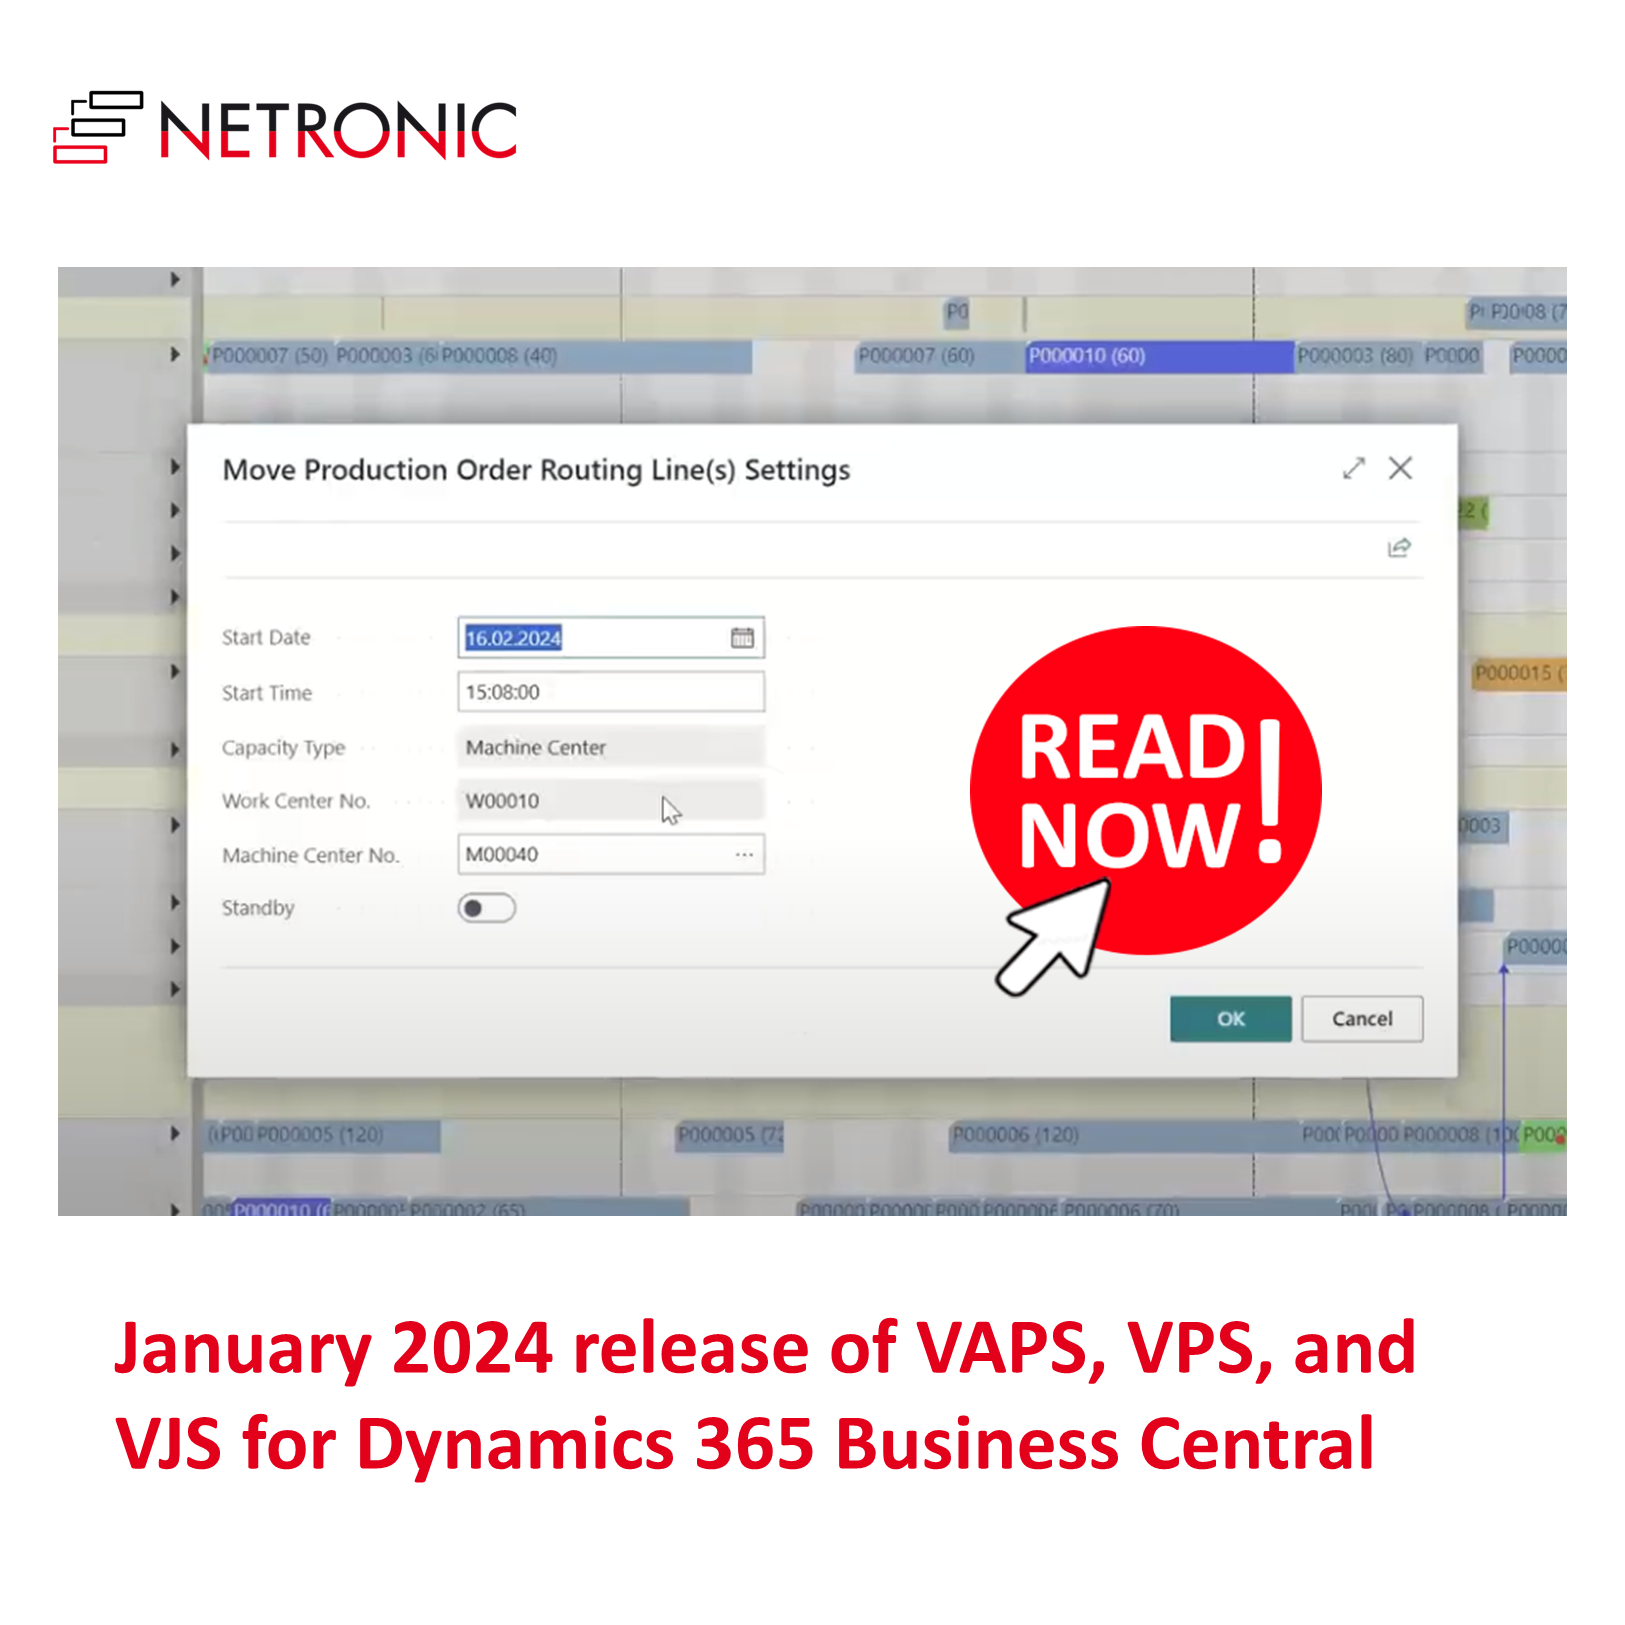 New release of VAPS, VPS, and VJS for Dynamics 365 Business Central